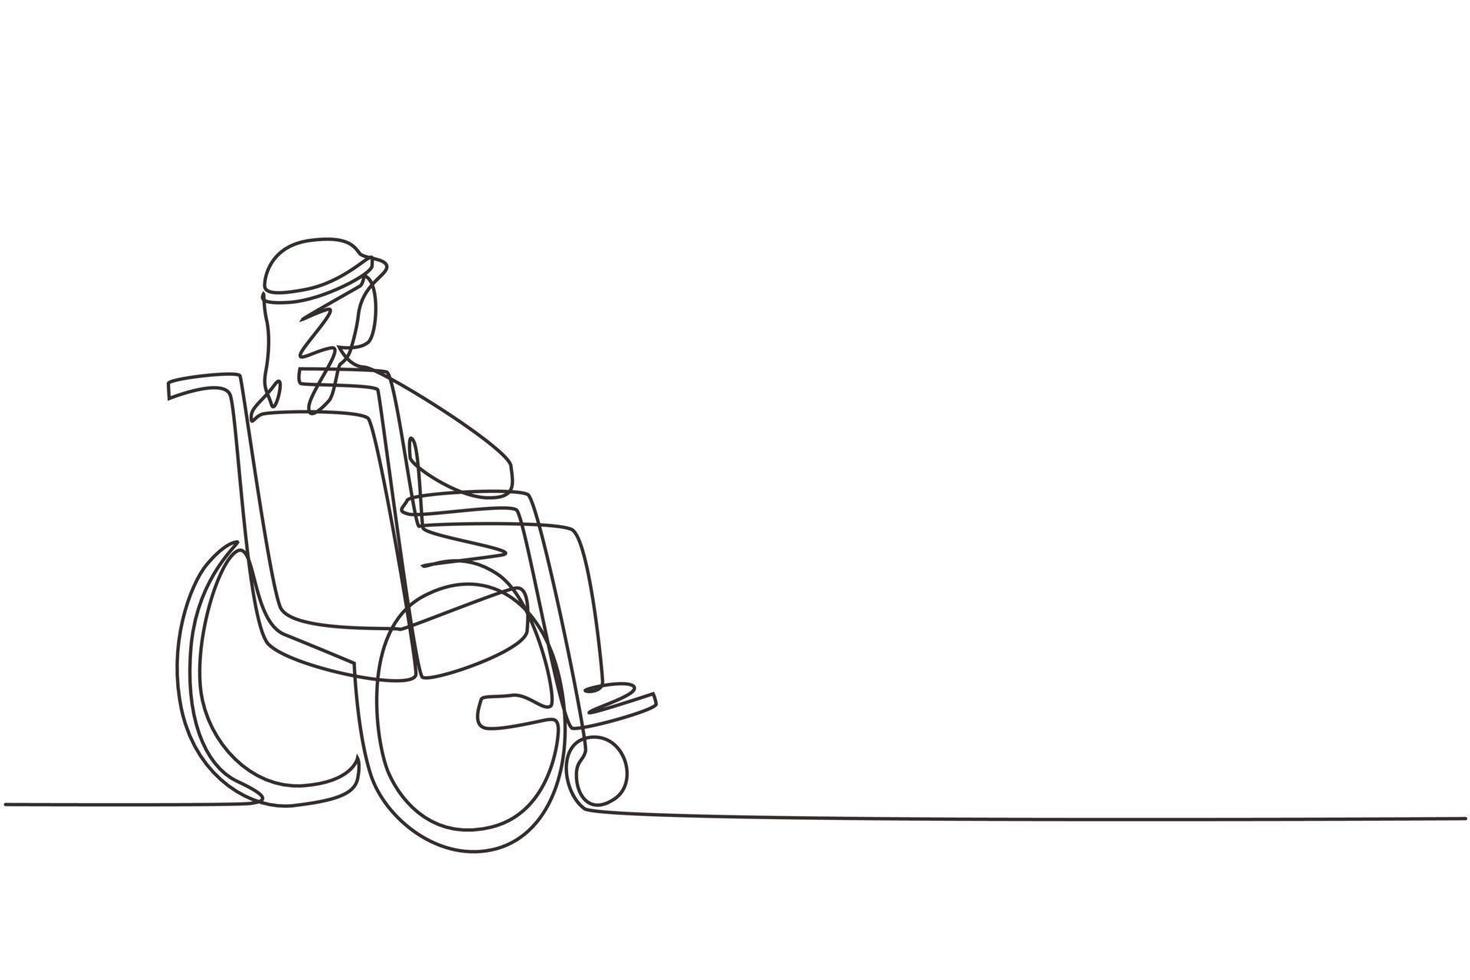 Continuous one line drawing back side of lonely old Arab man sitting on wheelchair, looking at distant dry autumn leaves in outside. Lonely, forlorn, desolate, lonesome. Single line draw design vector